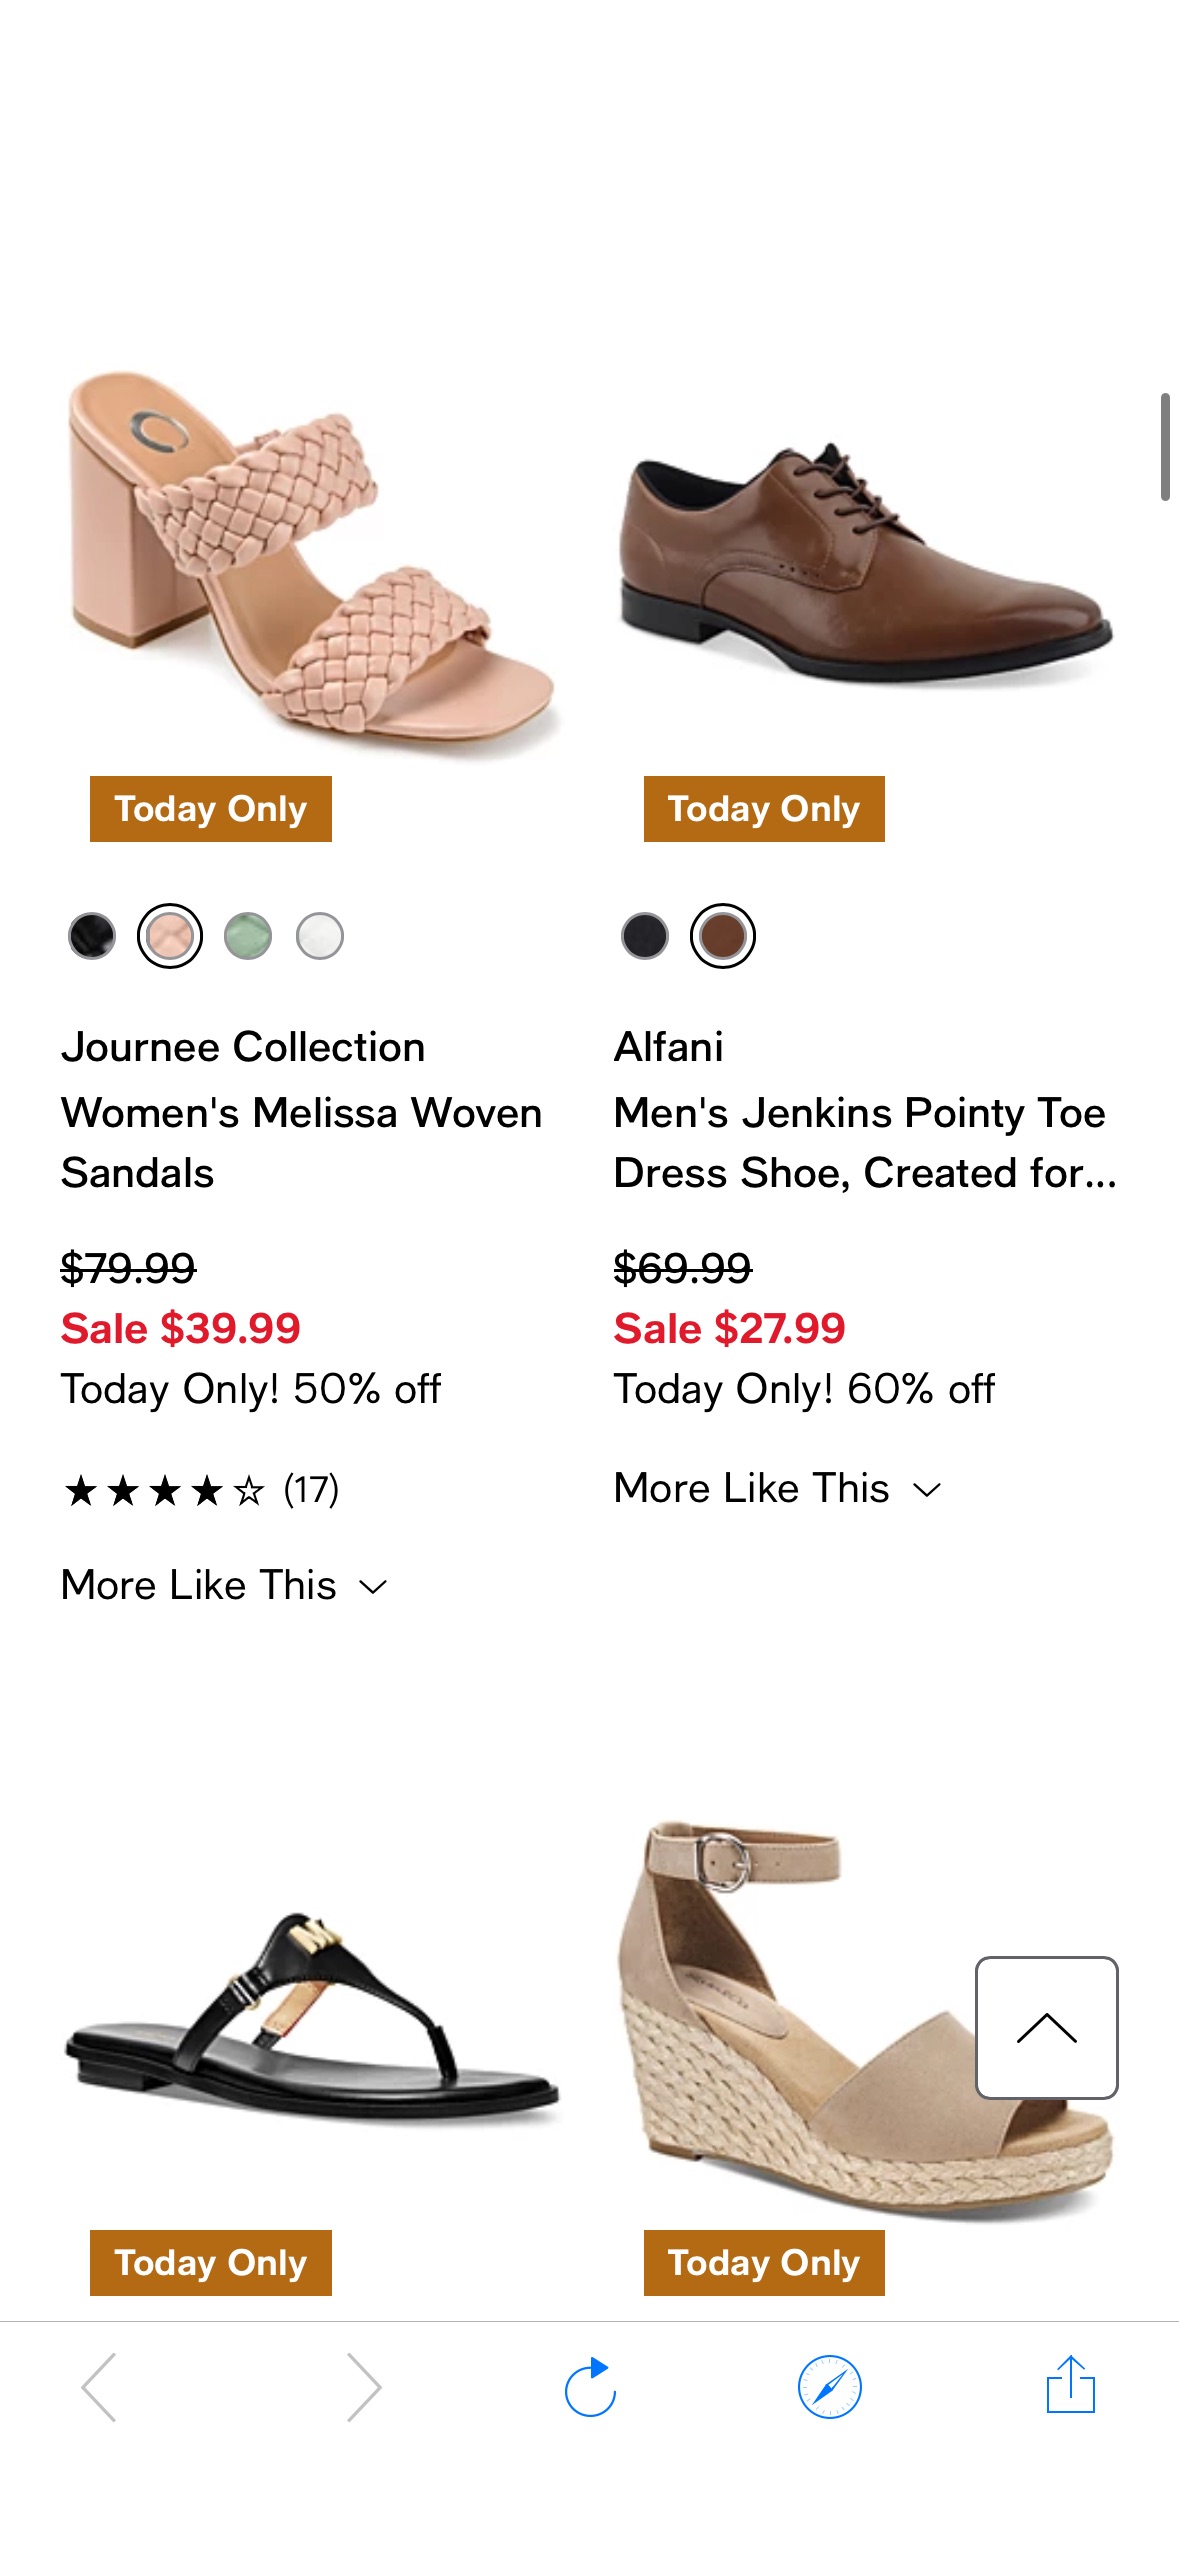 Today Only! Flash Sale at Macy’s